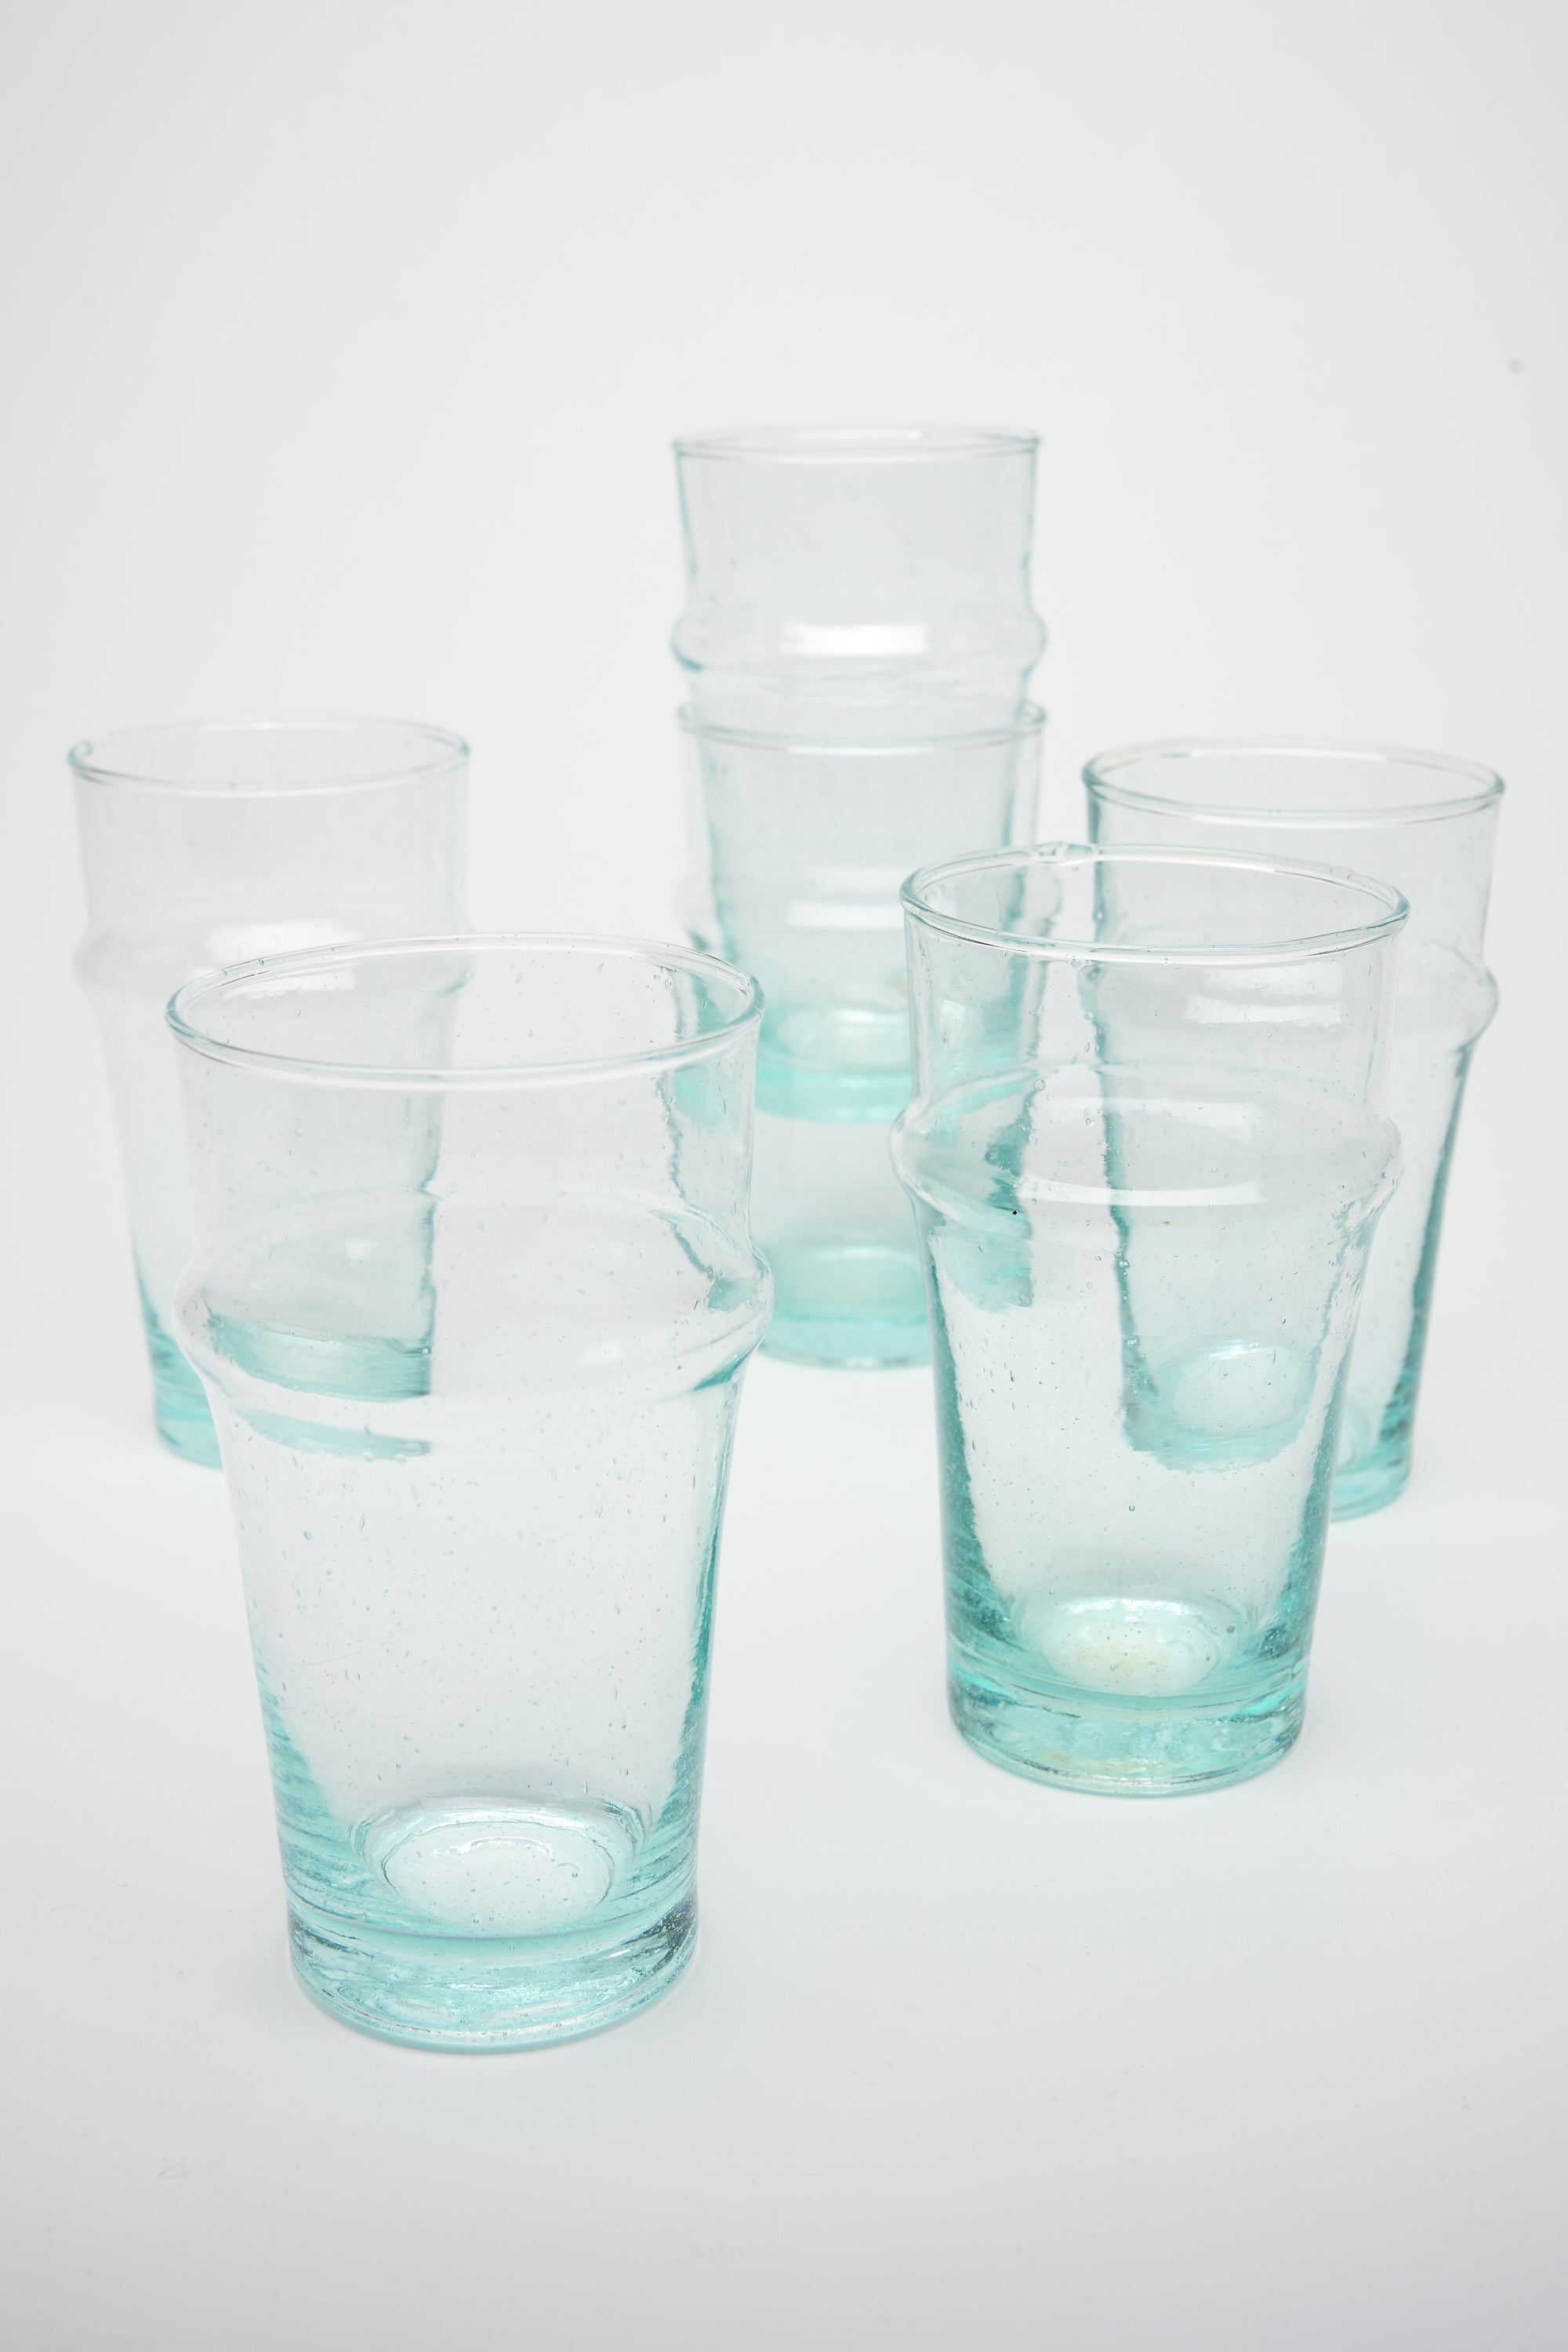 Moroccan Beldi Tall Glasses in Clear, SET OF 6